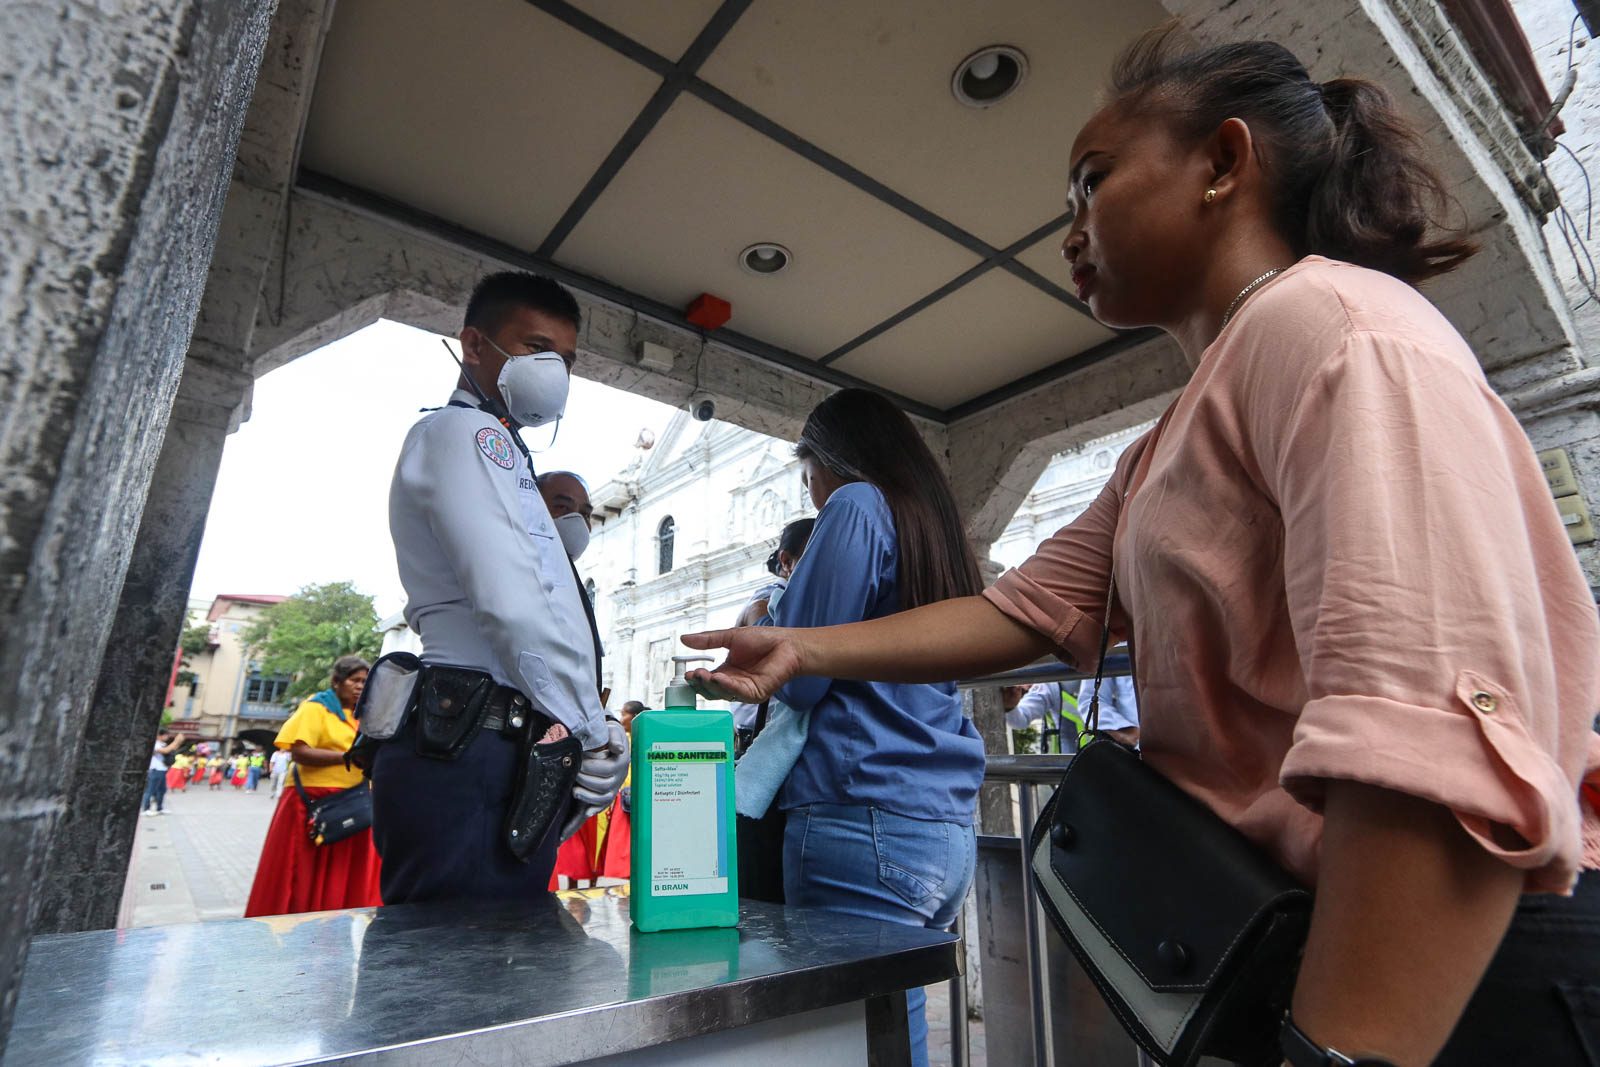 Cebu City requires wearing of face masks when going out in public